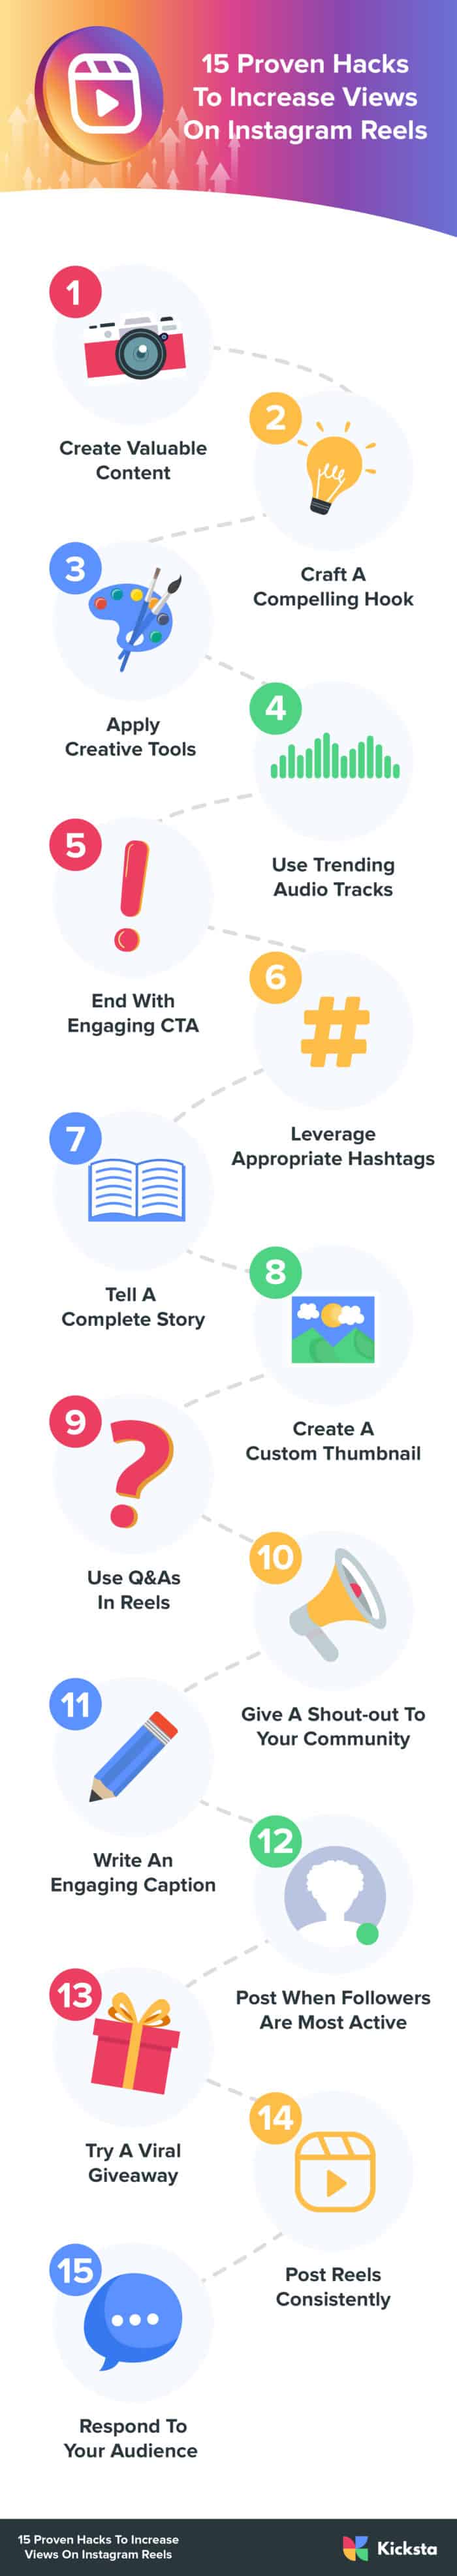 how to increase views on instagram reels kicksta infographic